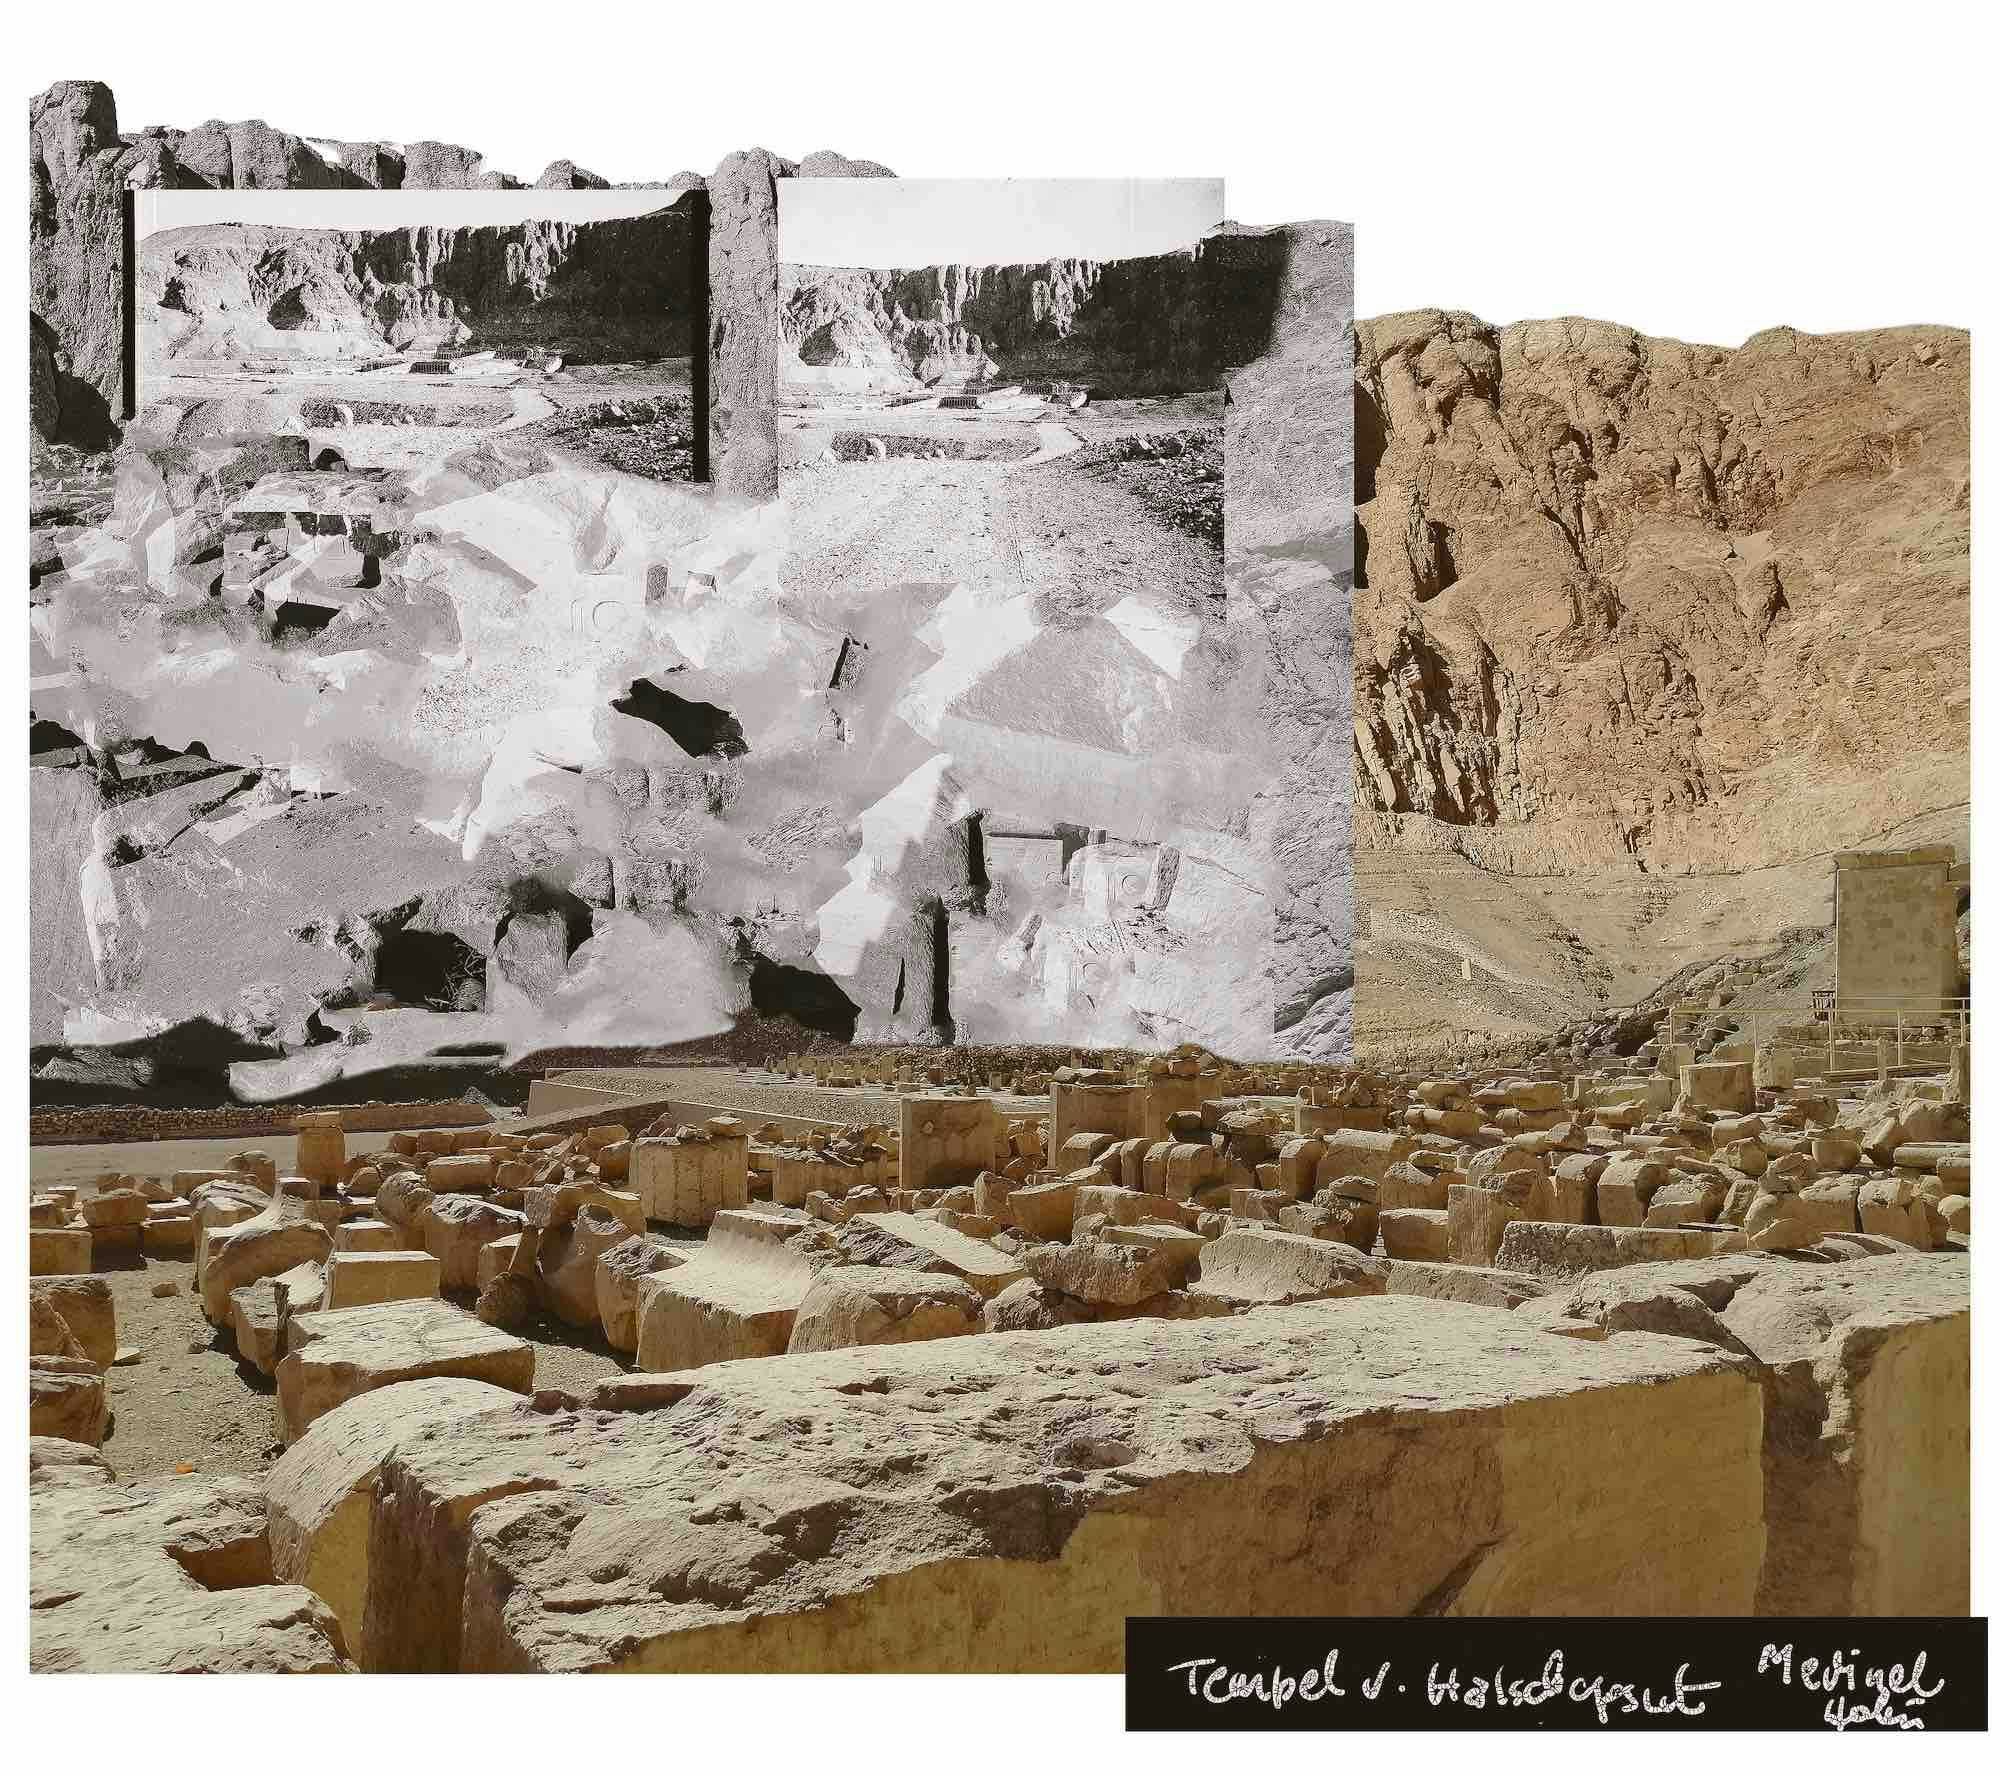 Remains of the temple of Hatshepsut, one colour image, one black and white